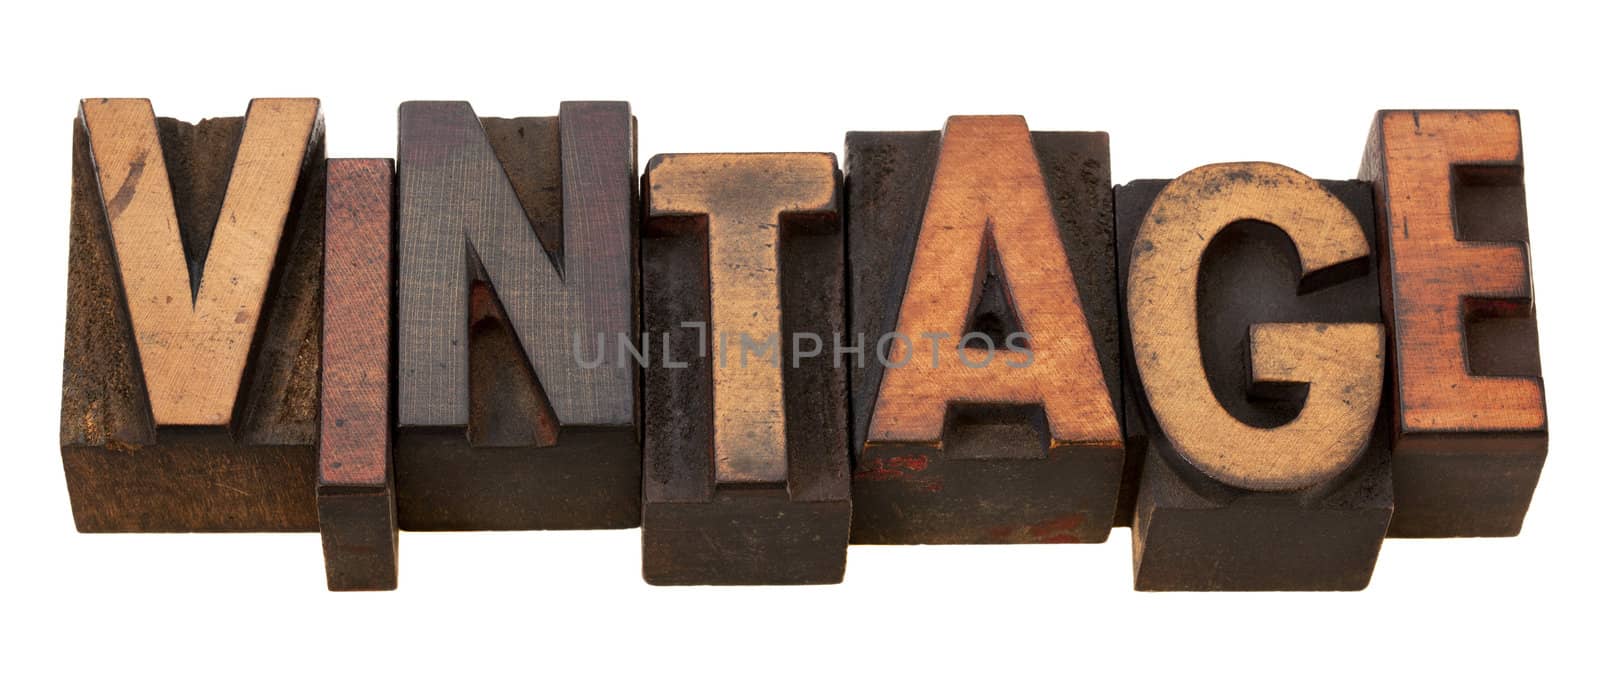 vintage, word in antique wooden letterpress printing blocks, stained by color inks, isolated on white